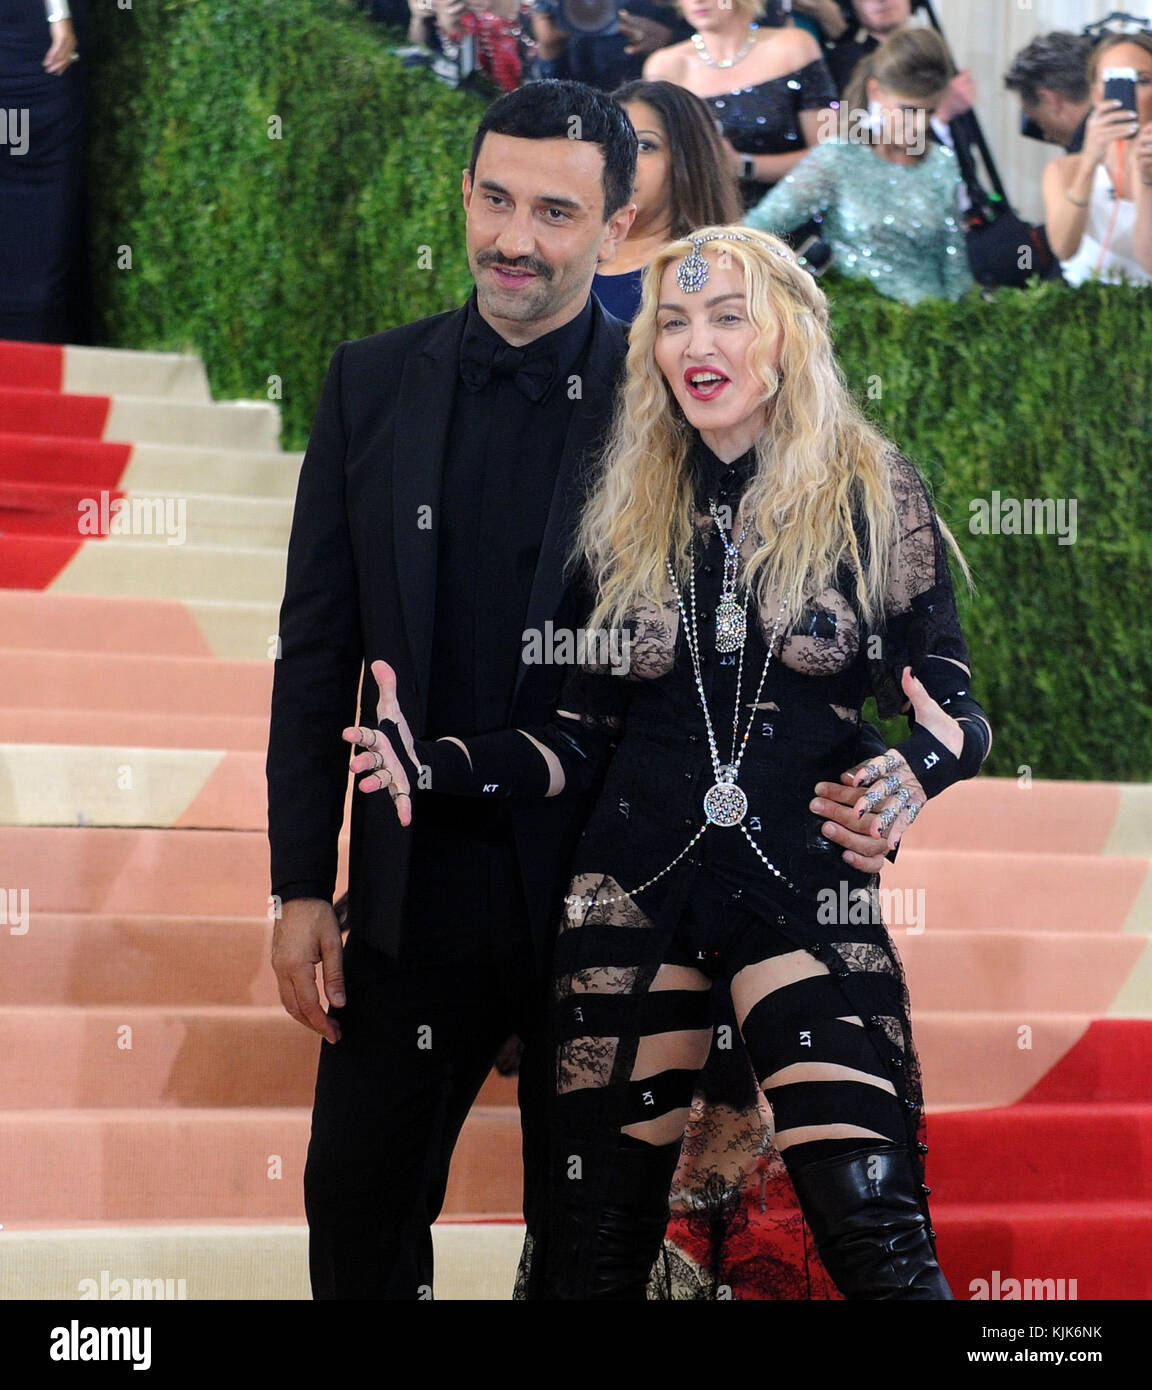 NEW YORK, NY - MAY 02: (Embargoed till 05/03/16) Madonna arrives for the  'Manus x Machina: Fashion In An Age Of Technology' Costume Institute Gala  at Metropolitan Museum of Art on May